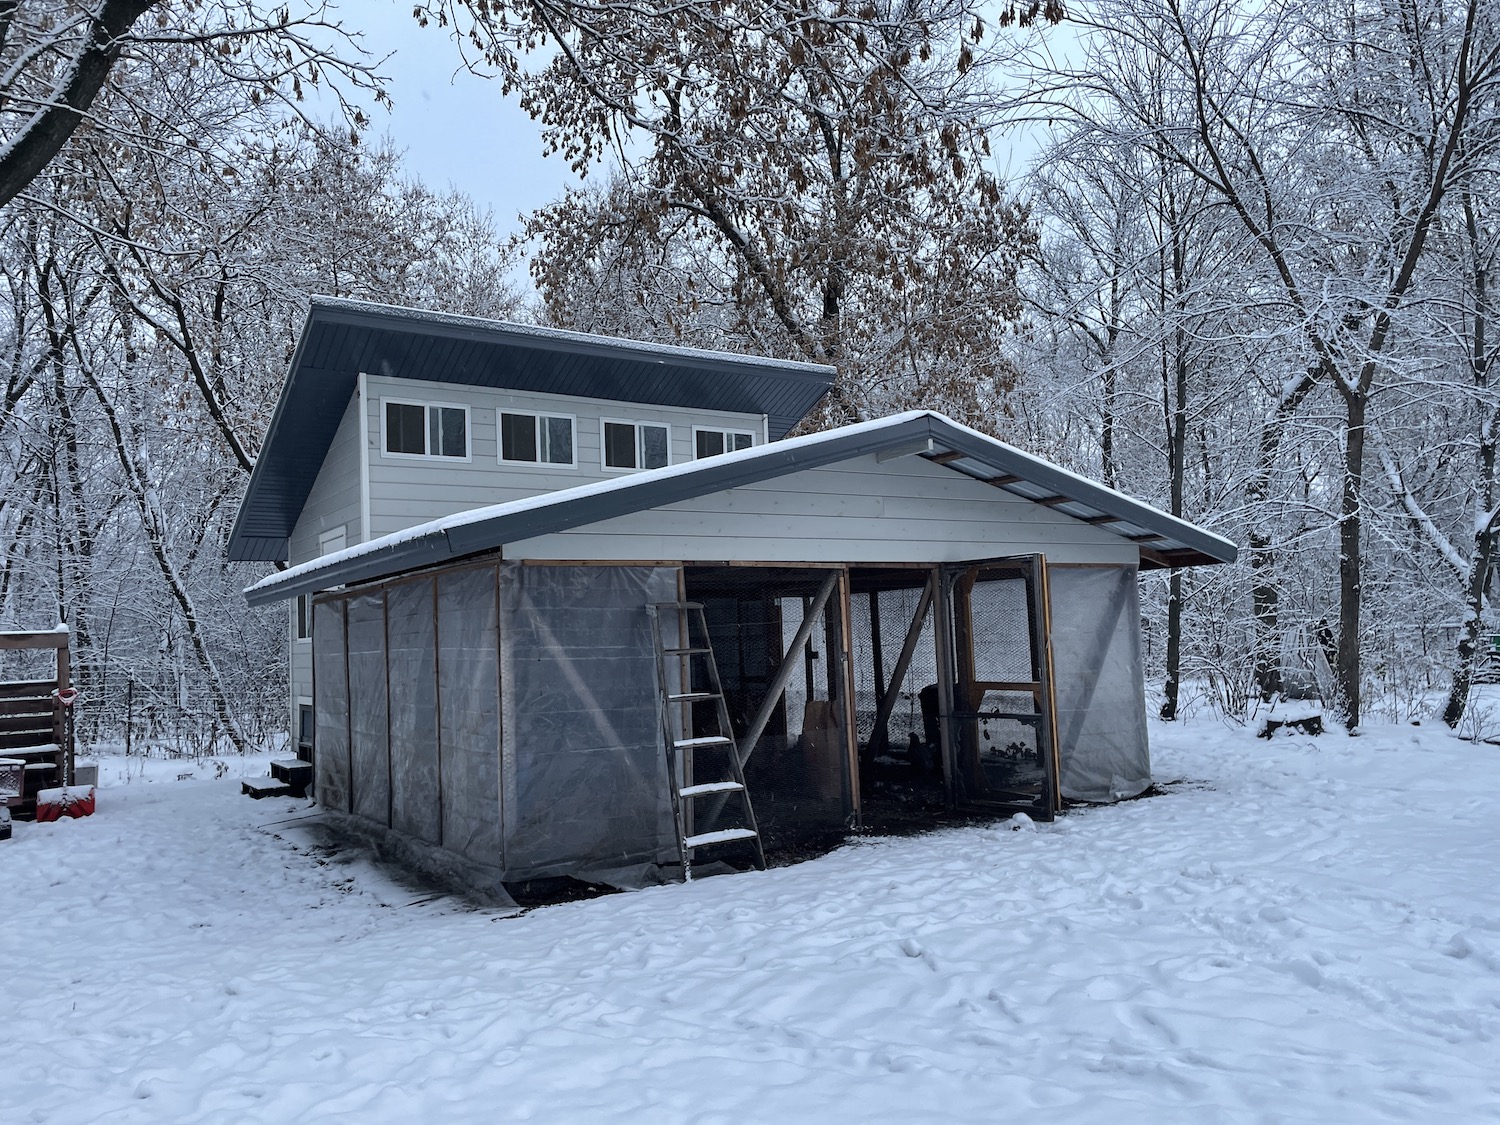 A large chicken coop in the winter with snow